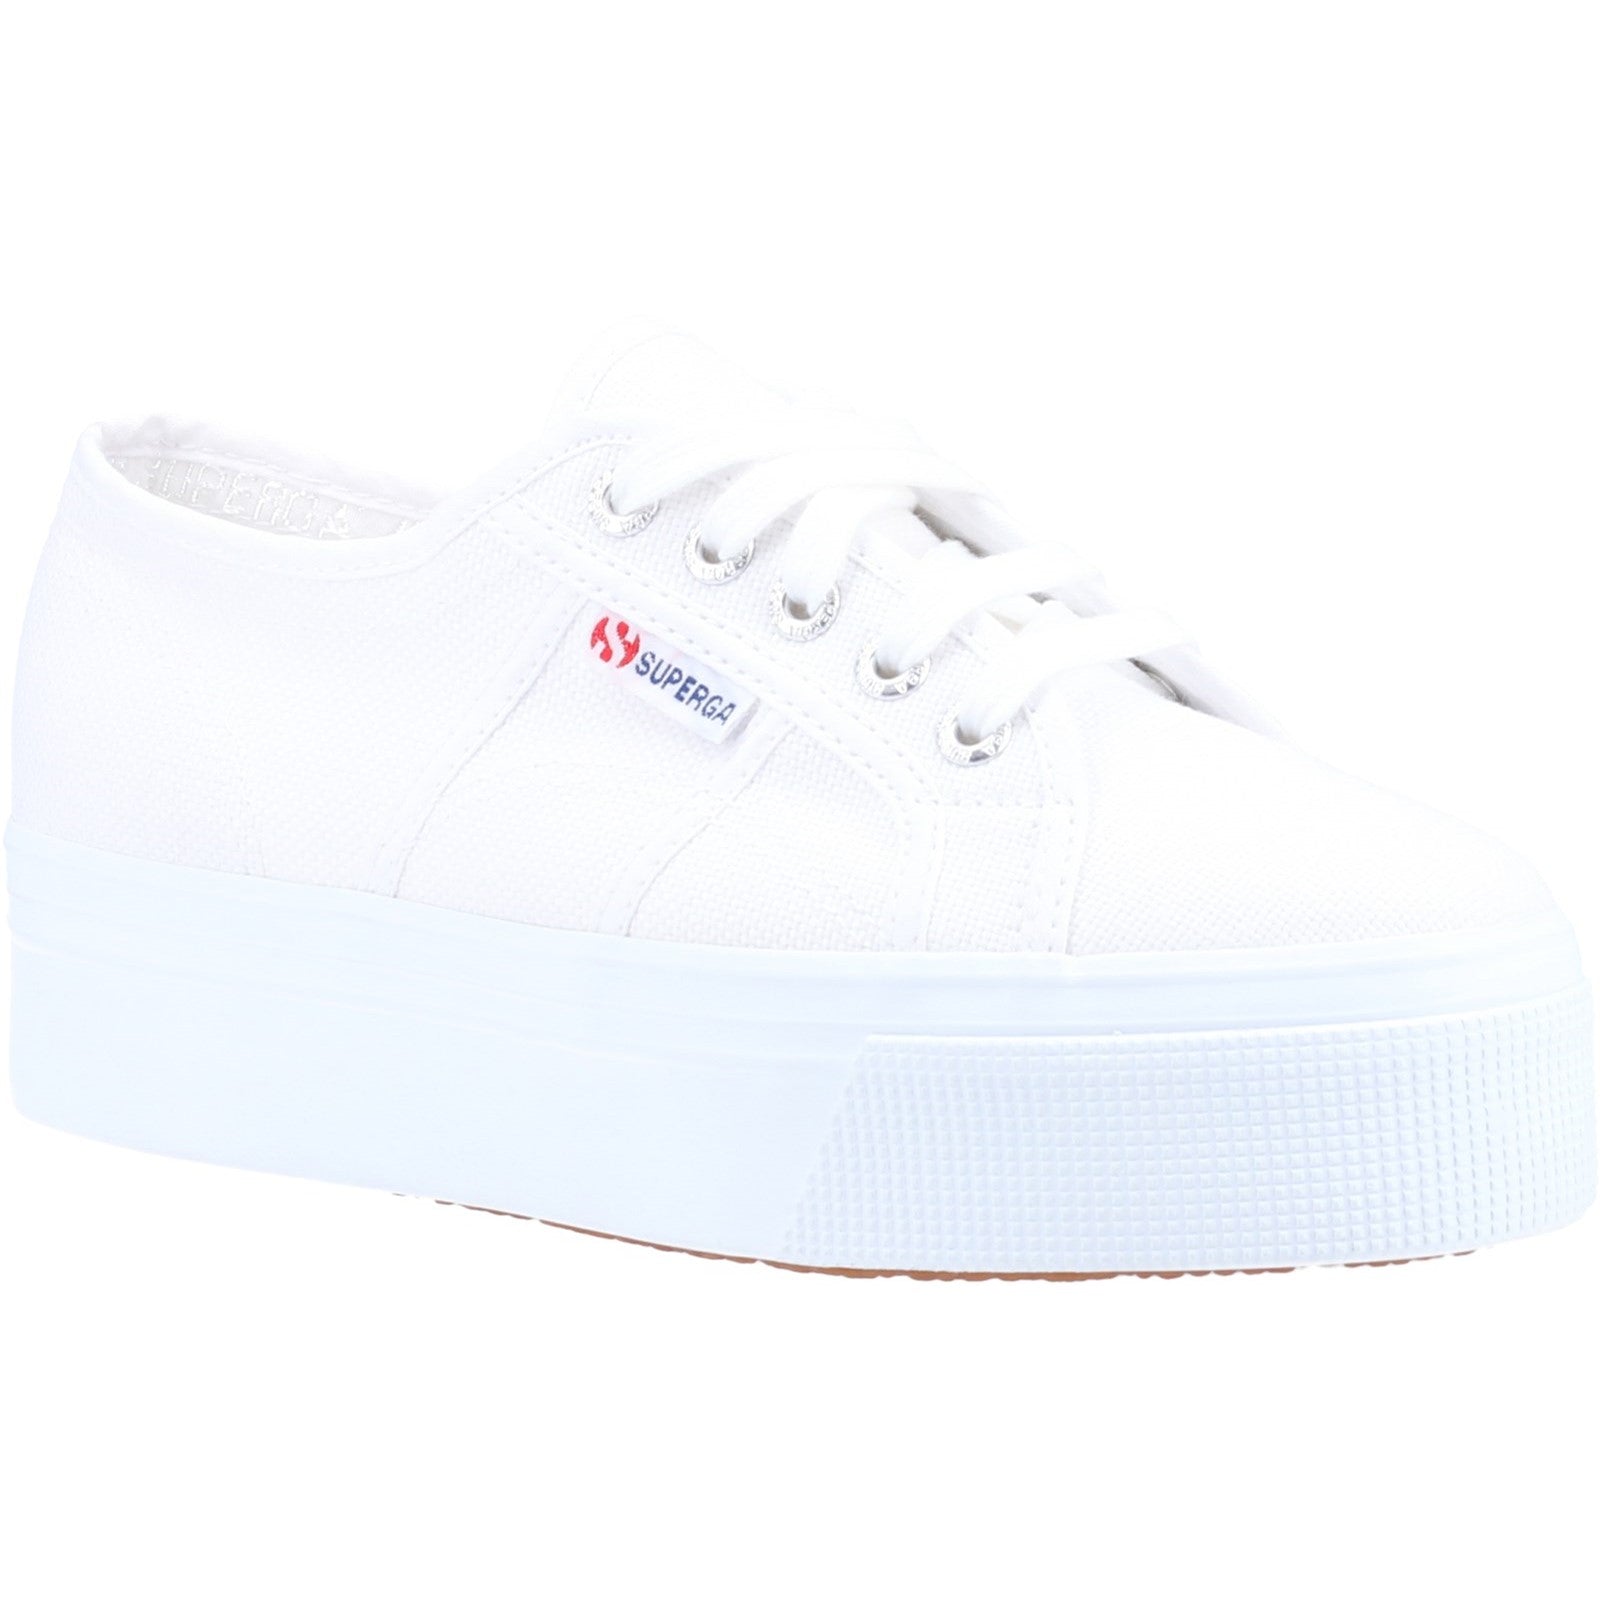 Superga Womens 2790 Linea Up And Down Platform Trainers - White